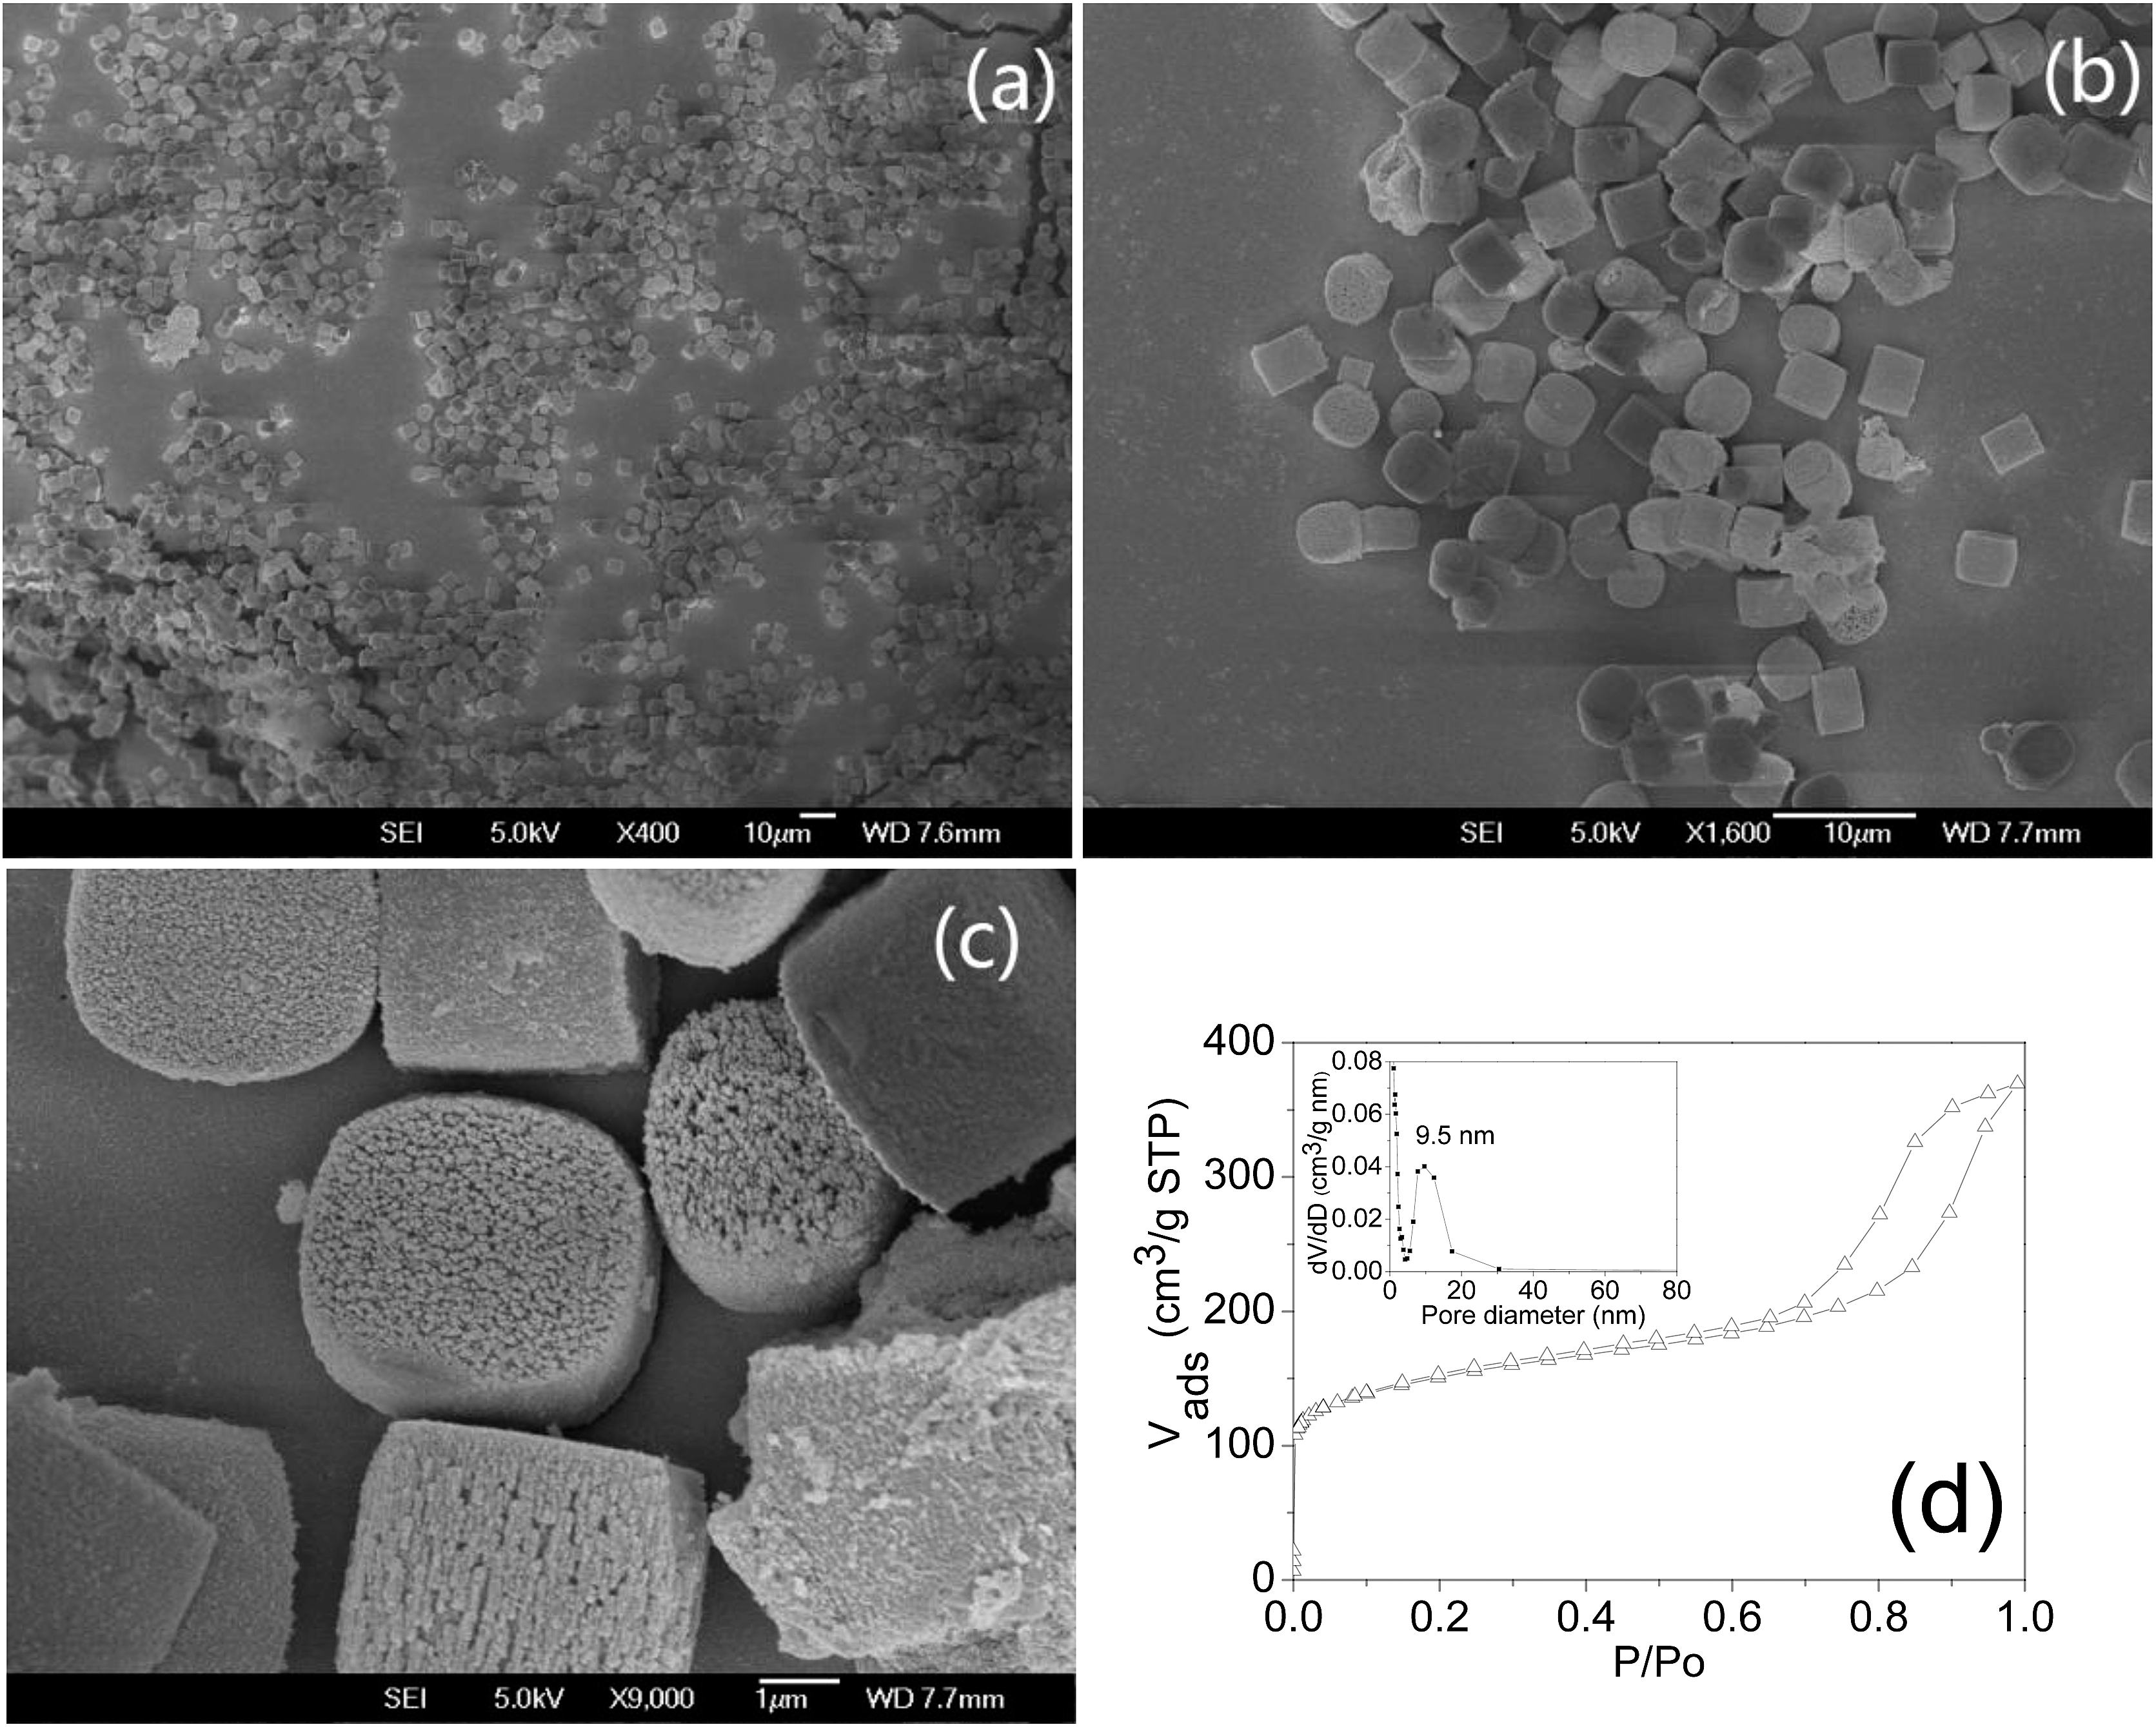 Synthesis and catalytic properties of ZSM-5 zeolite with hierarchical pores  prepared in the presence of n -hexyltrimethylammonium bromide - Journal of  Materials Chemistry A (RSC Publishing) DOI:10.1039/C5TA05350A